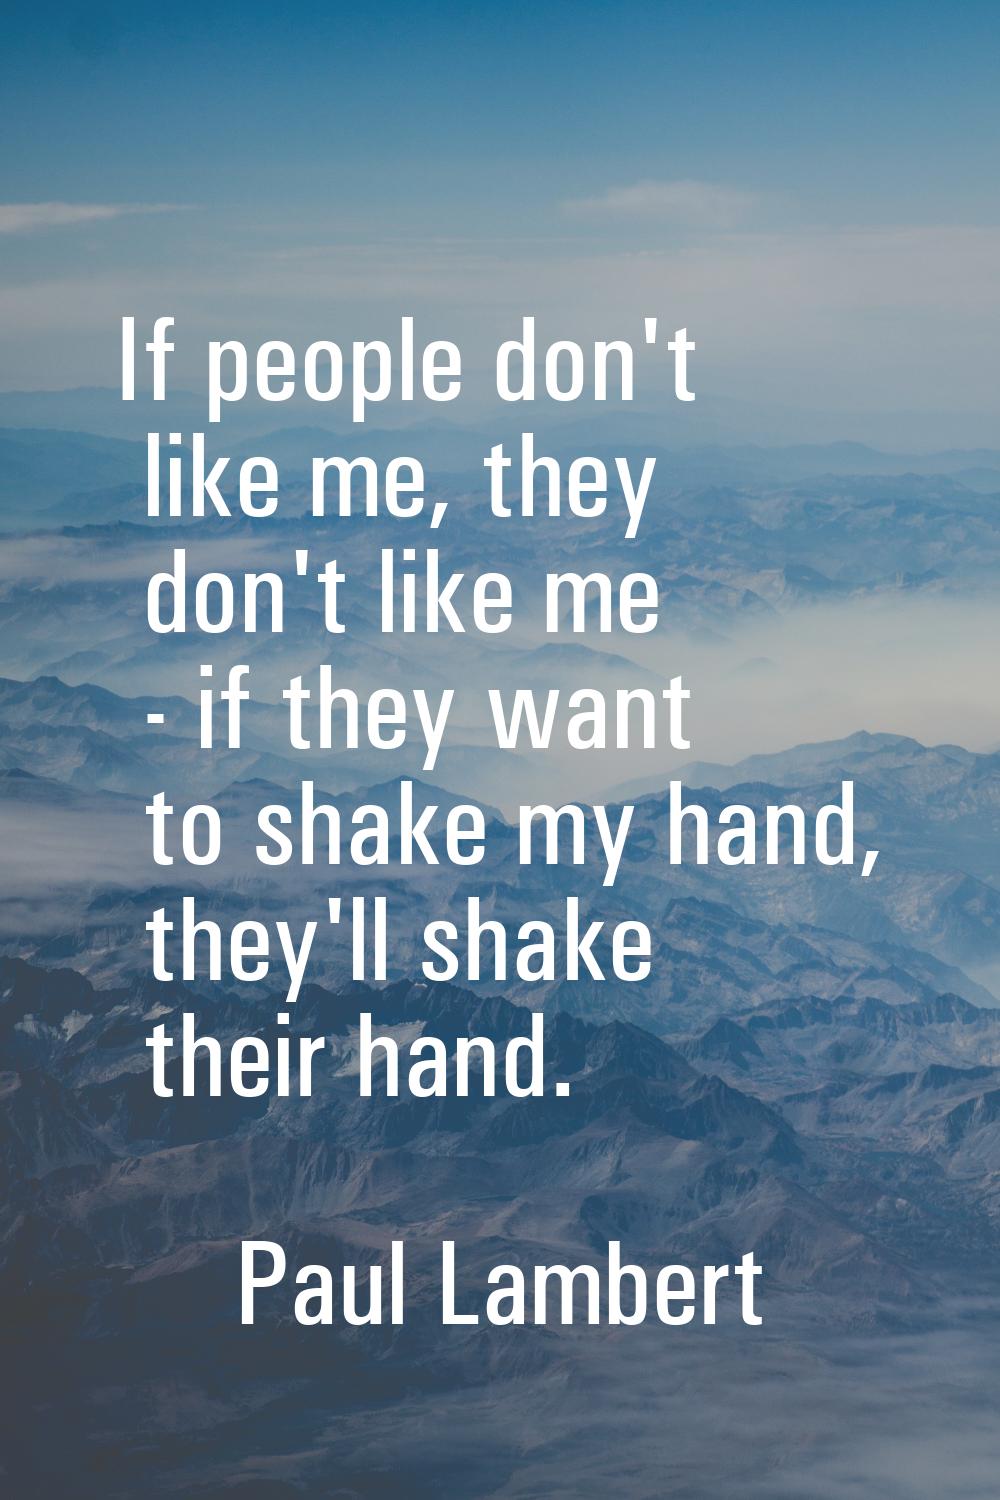 If people don't like me, they don't like me - if they want to shake my hand, they'll shake their ha